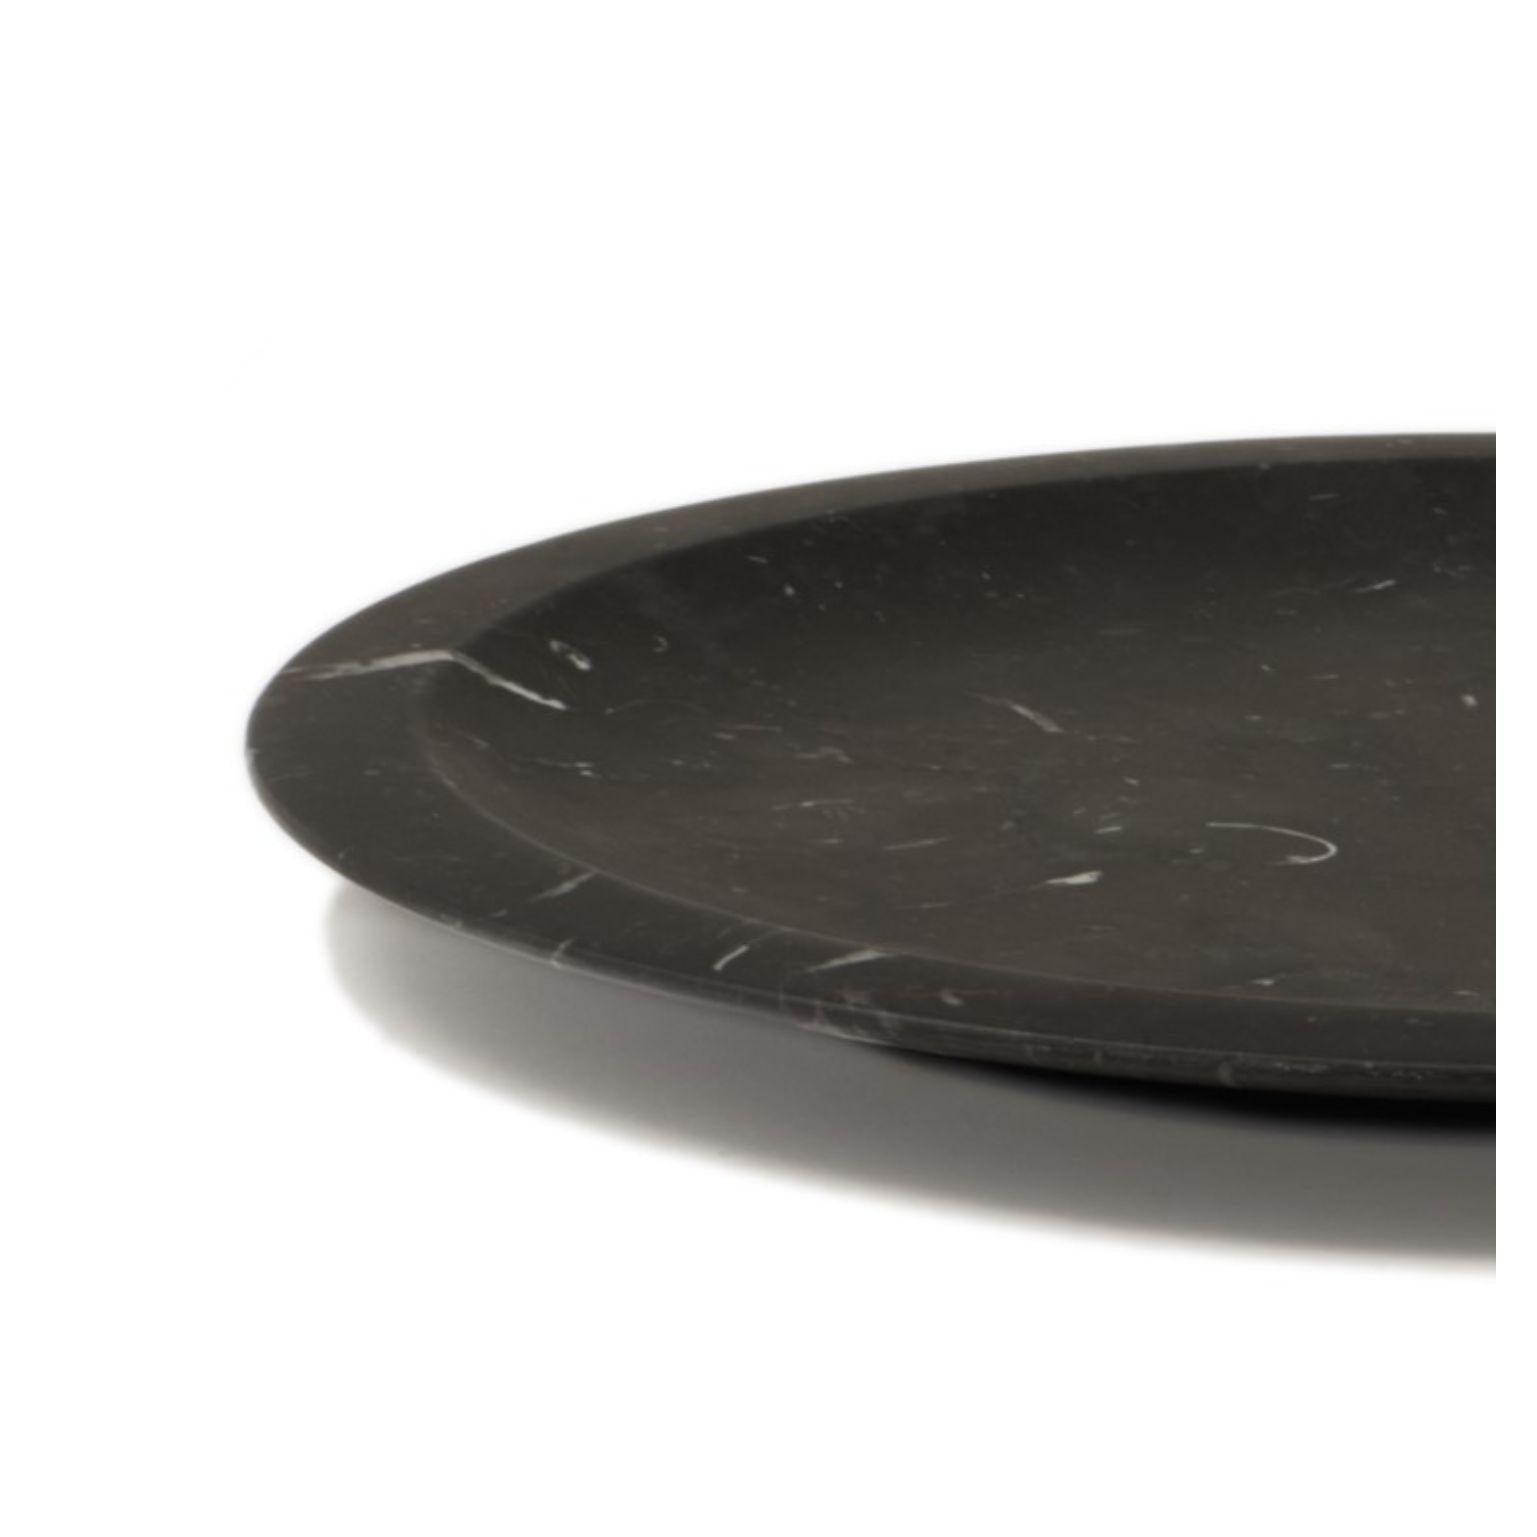 Modern Piatto Piano #1, Dining Plate, Black by Ivan Colominas